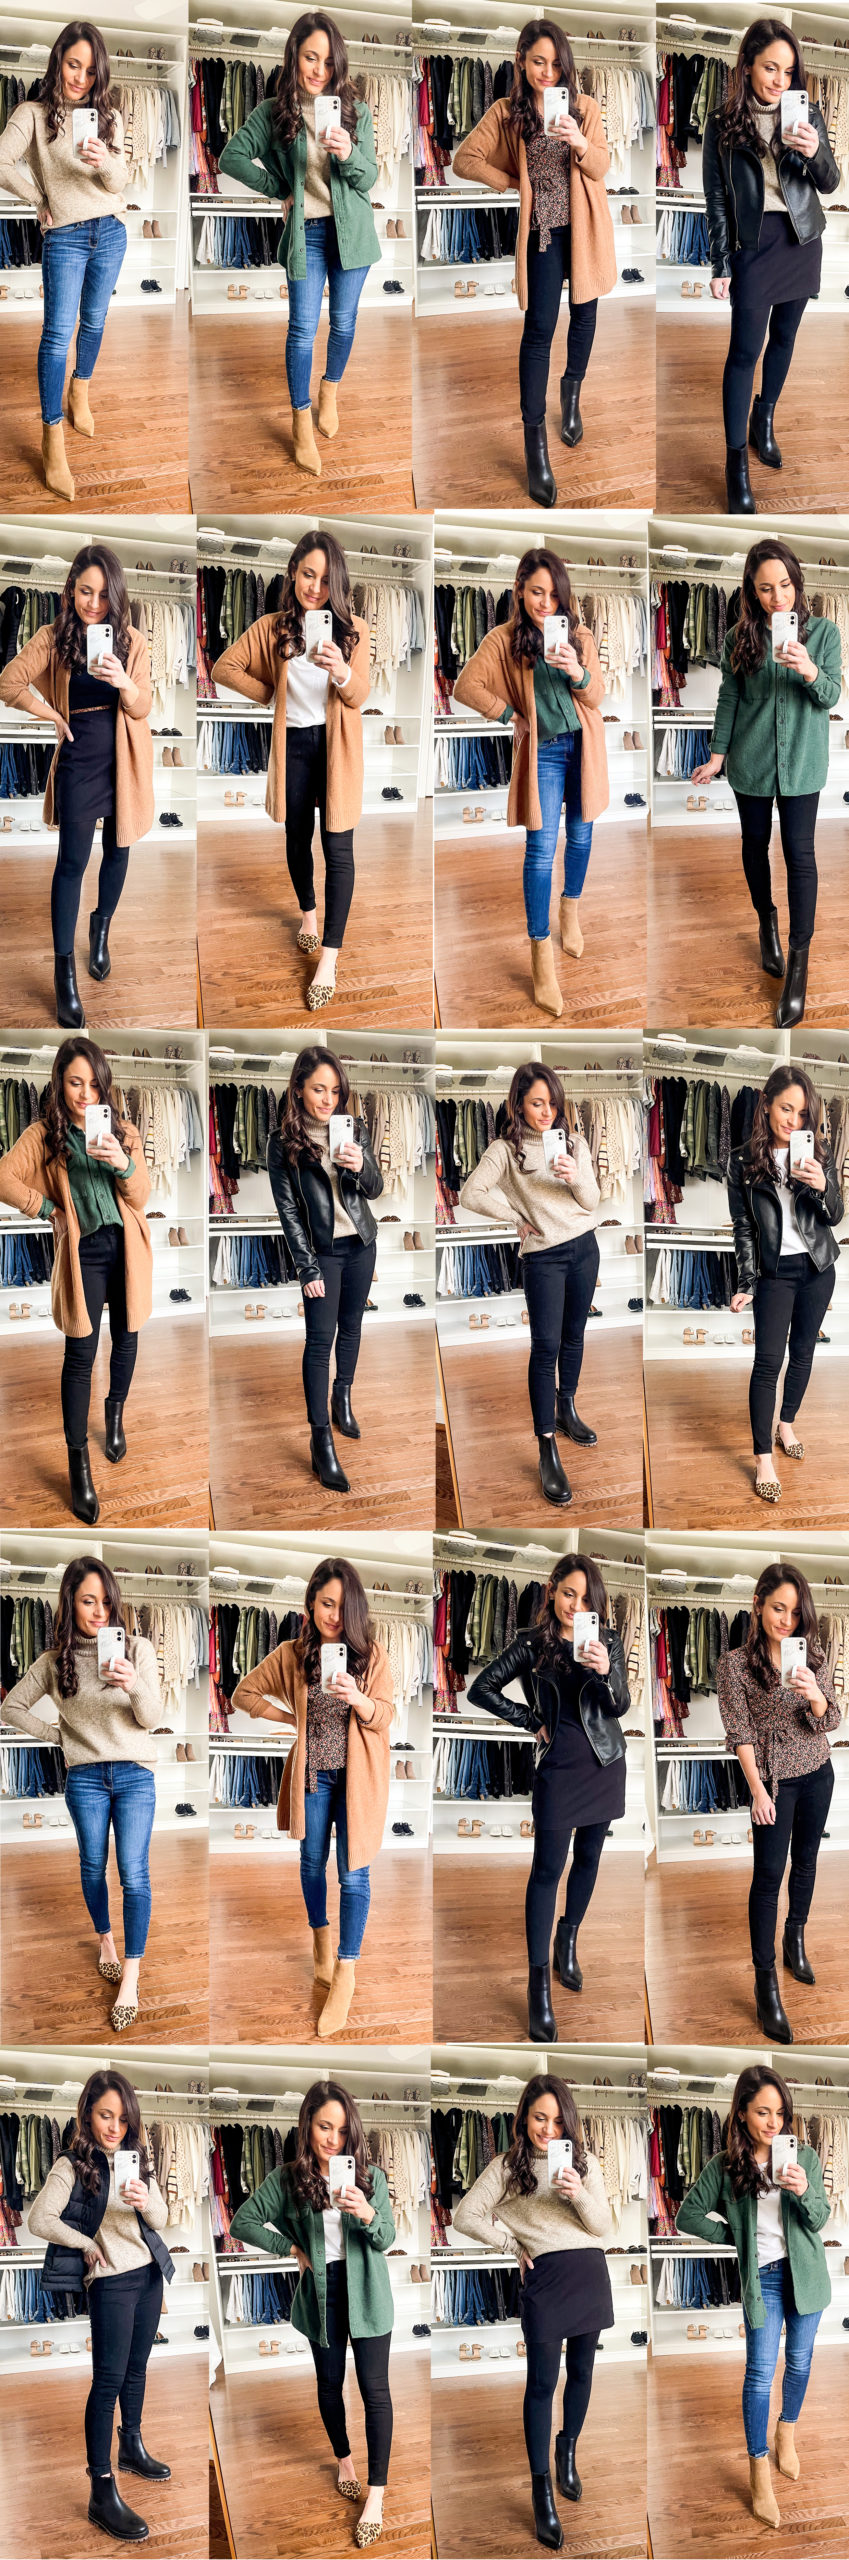 One Week of Outfits with LOFT - Pumps & Push Ups